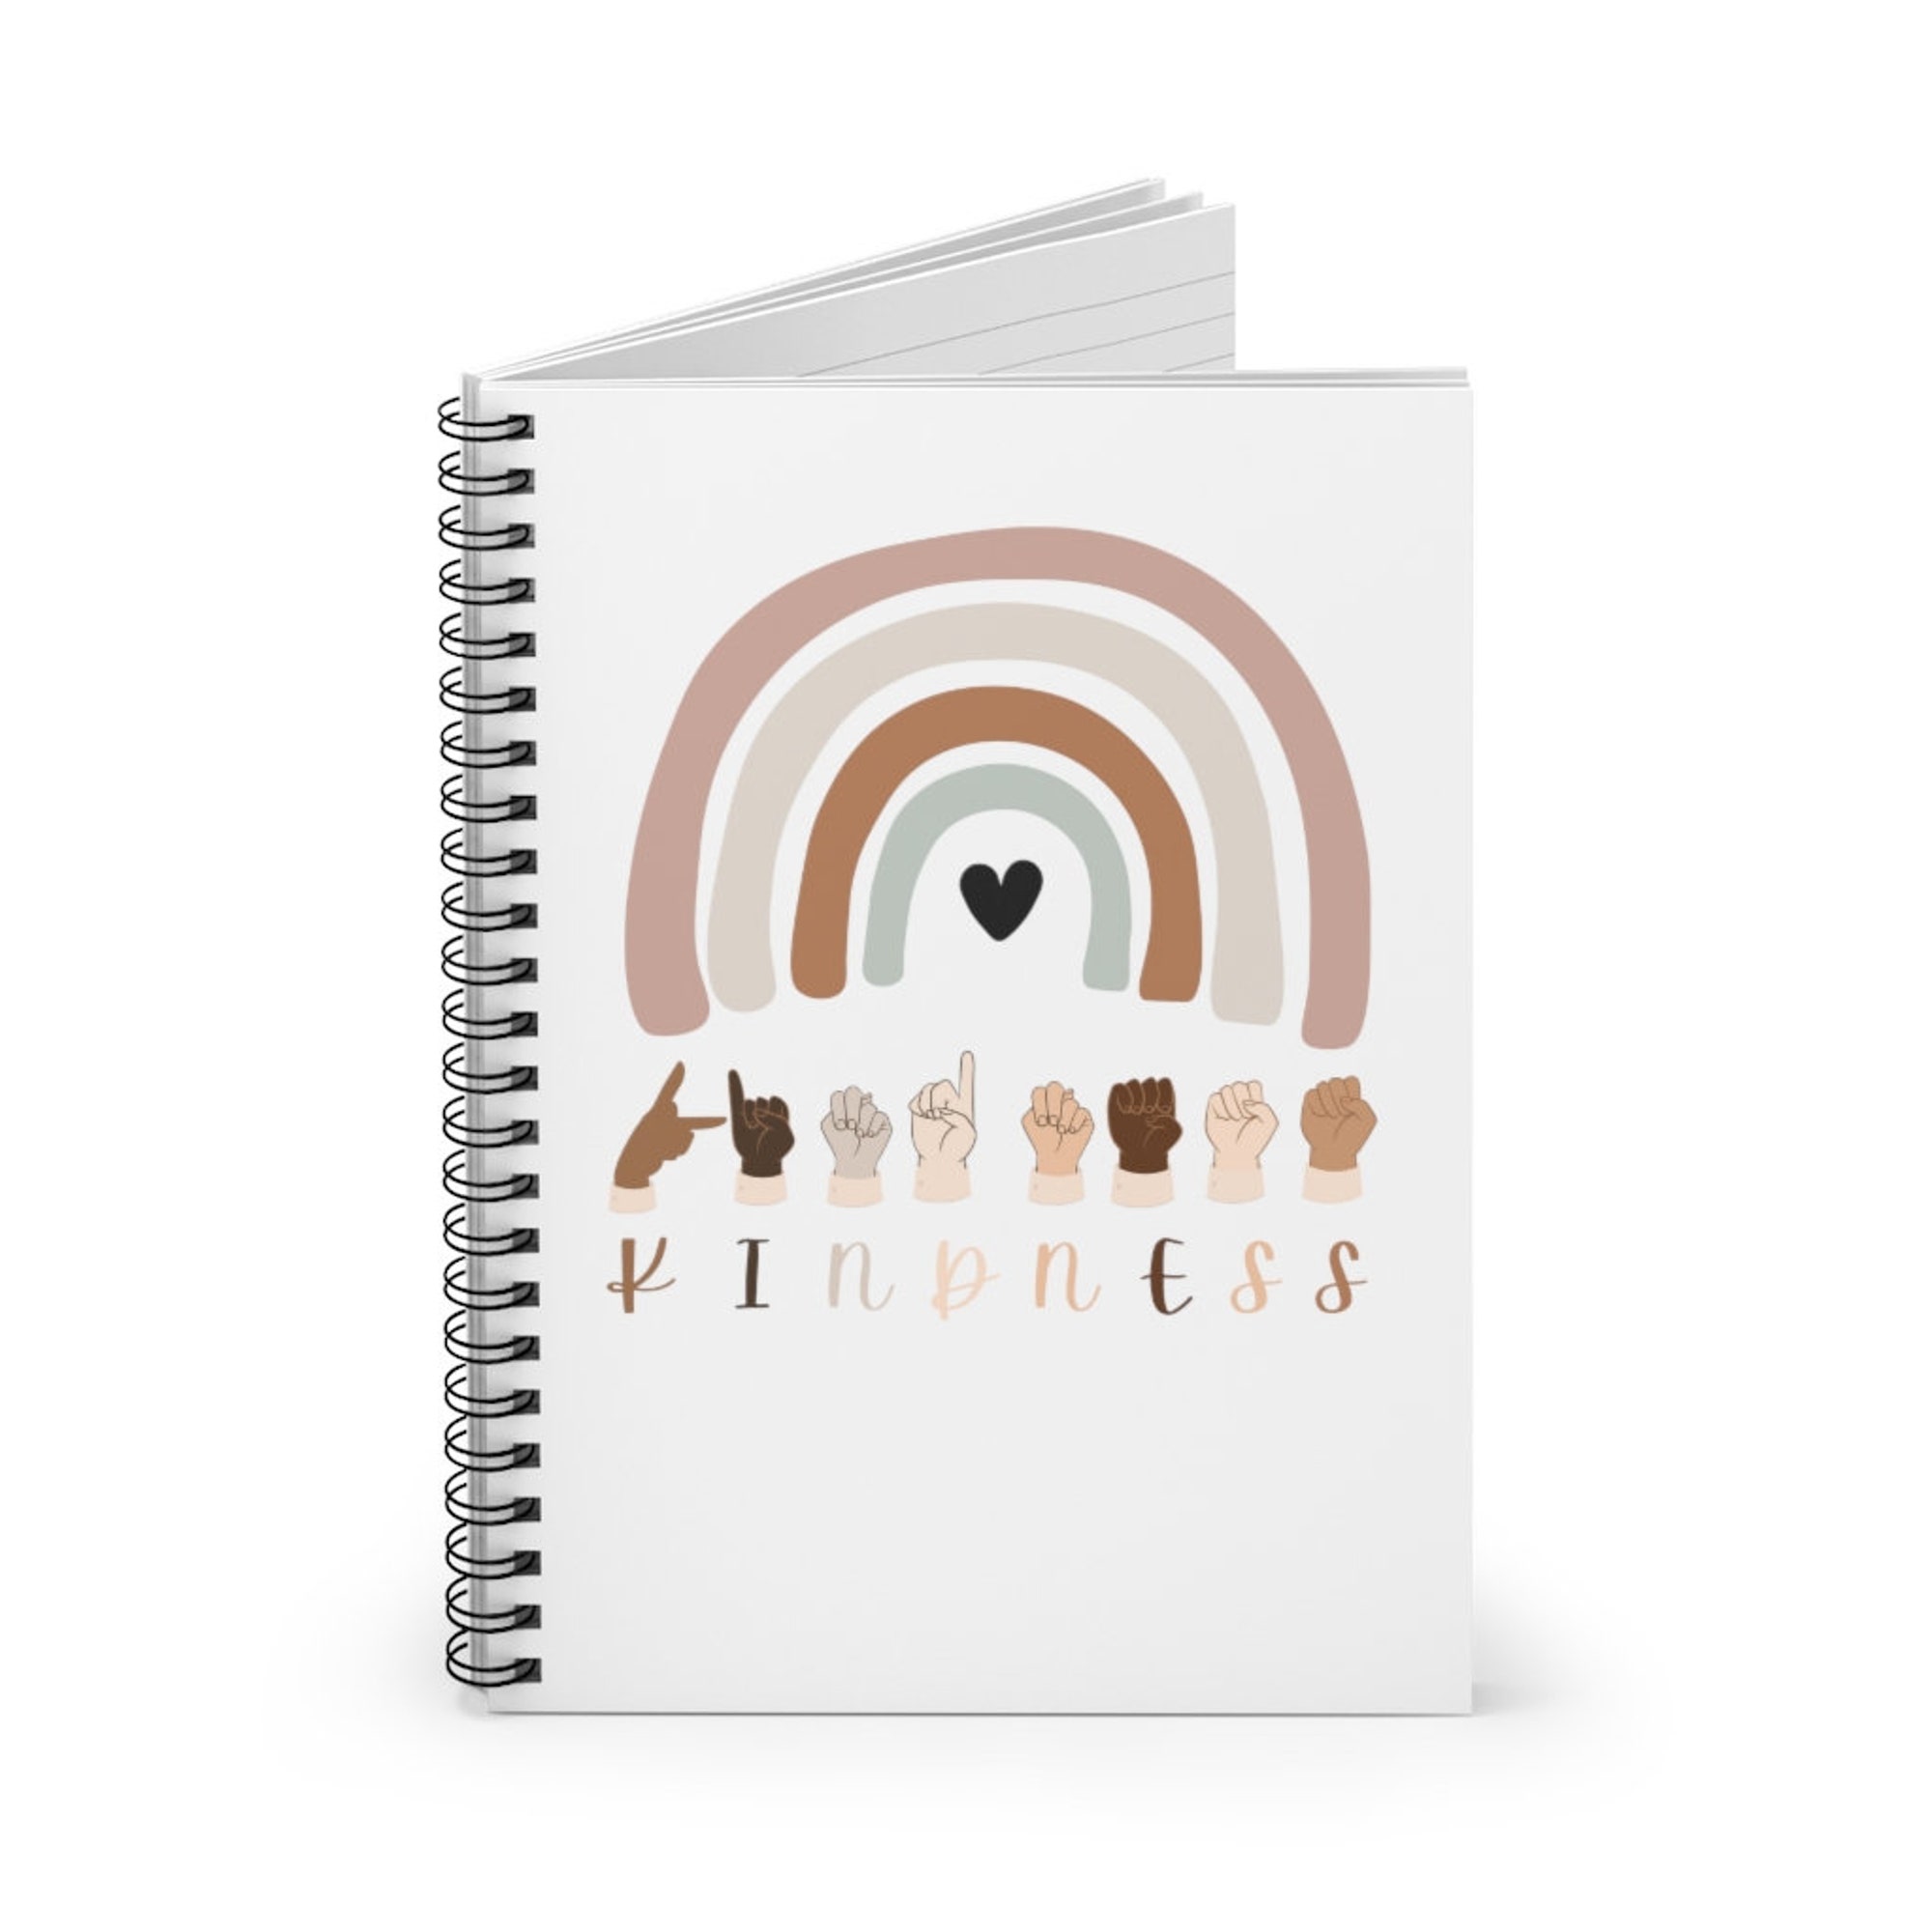 KINDNESS In ASL RAINBOW, Sign Language Kindness Spiral Notebook - Ruled Line